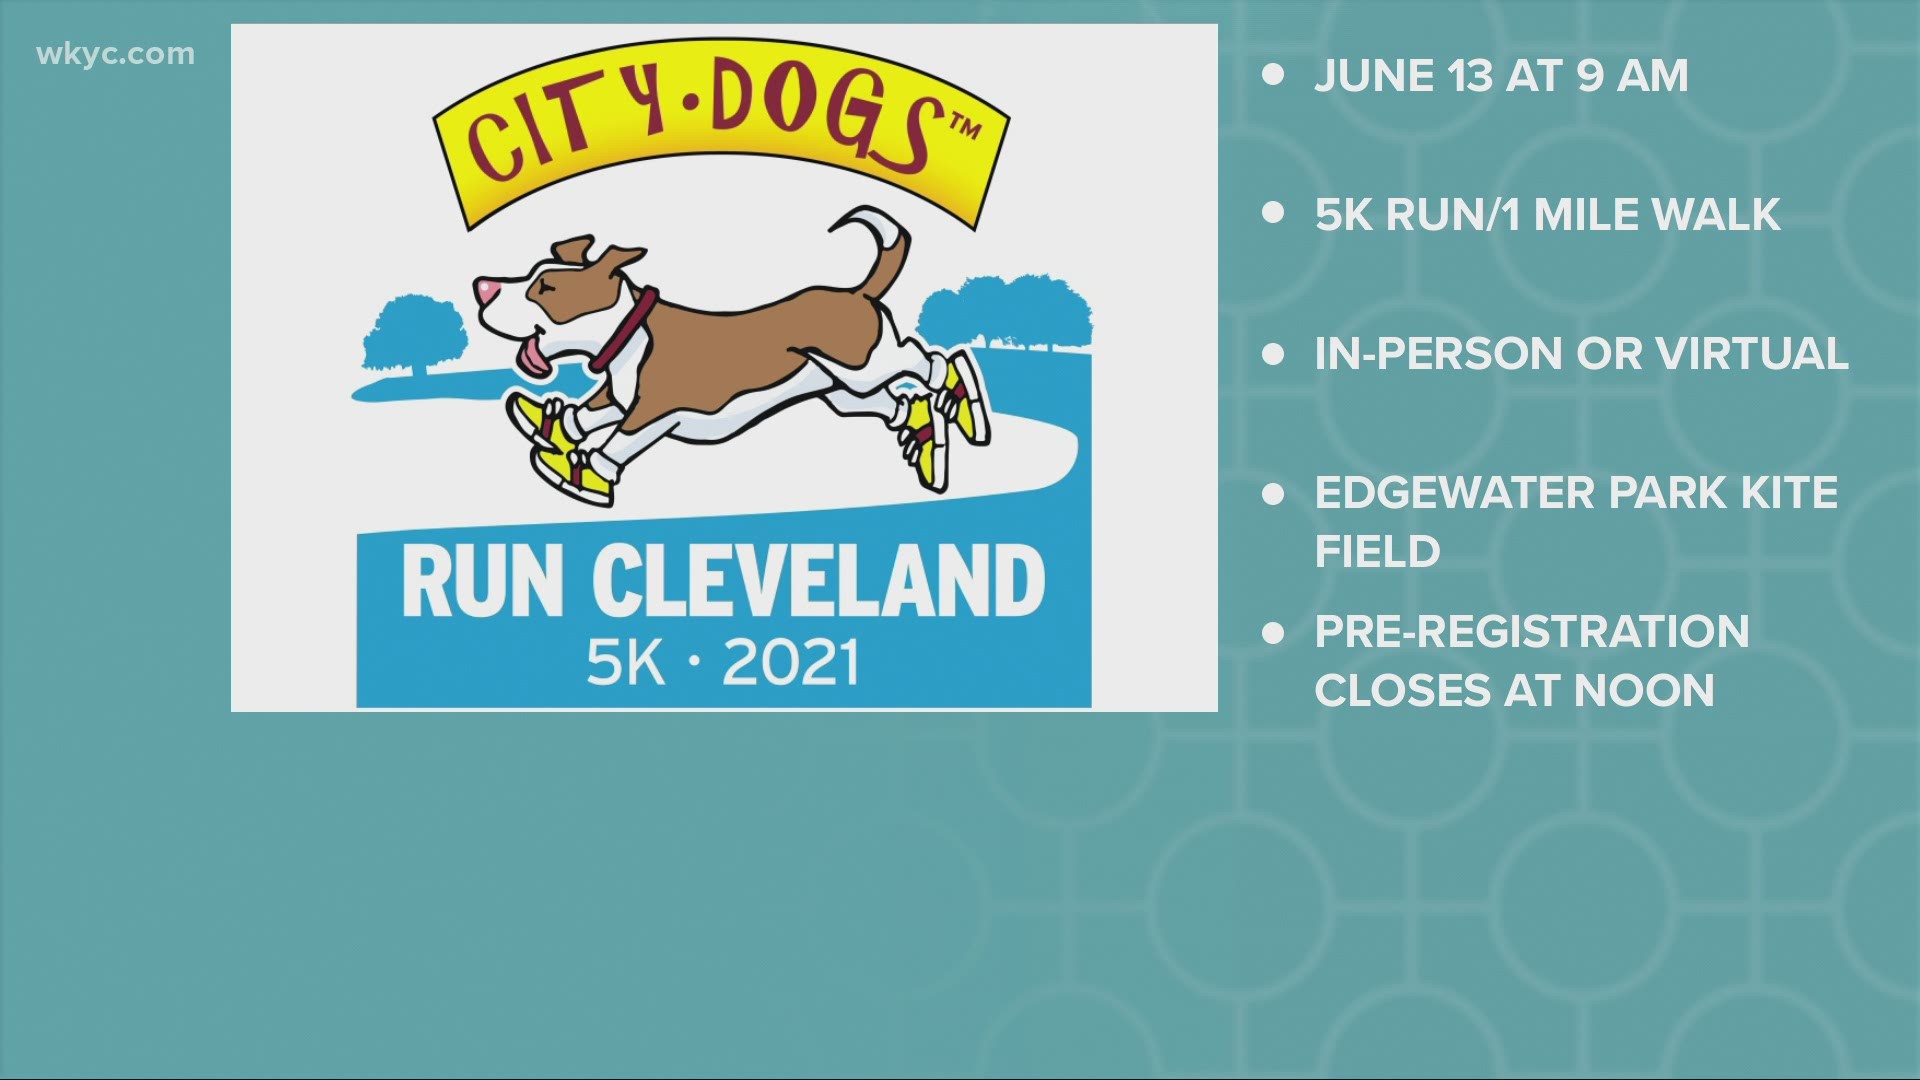 Friends of CITY DOGS Cleveland 5k run this weekend